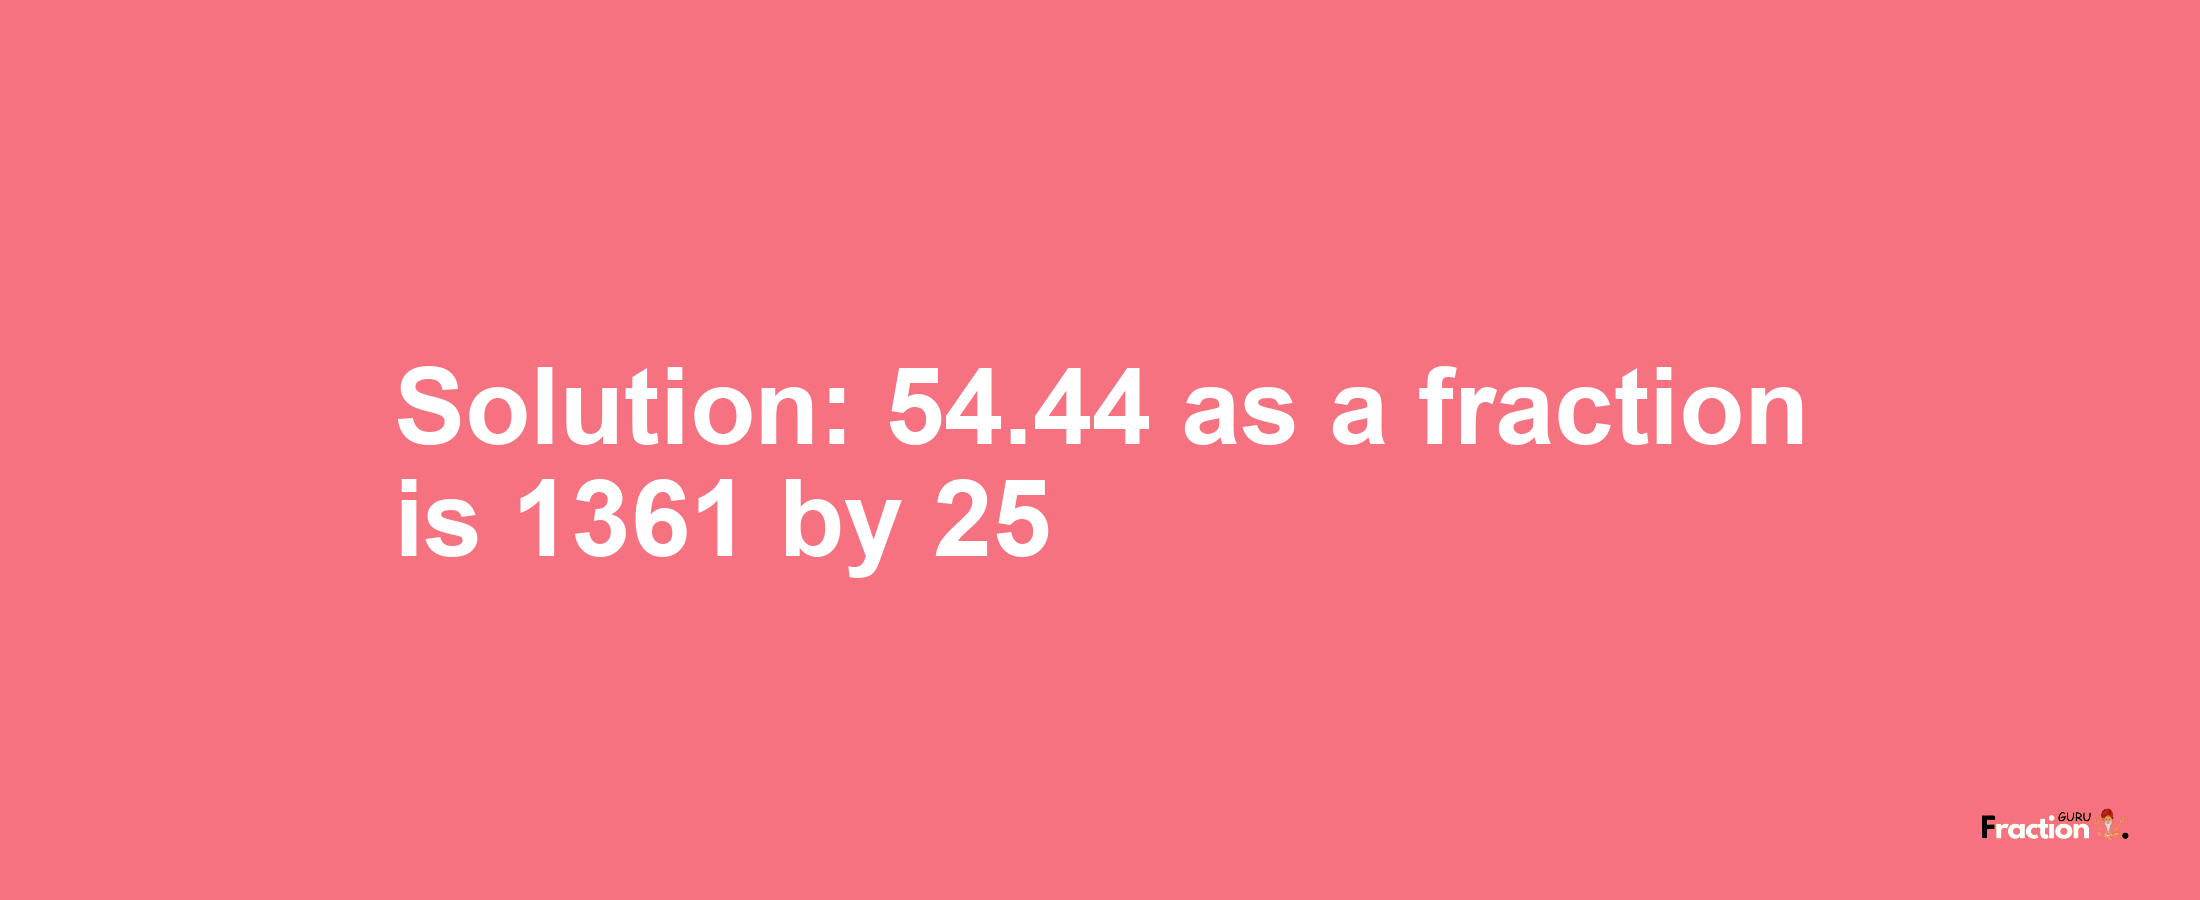 Solution:54.44 as a fraction is 1361/25